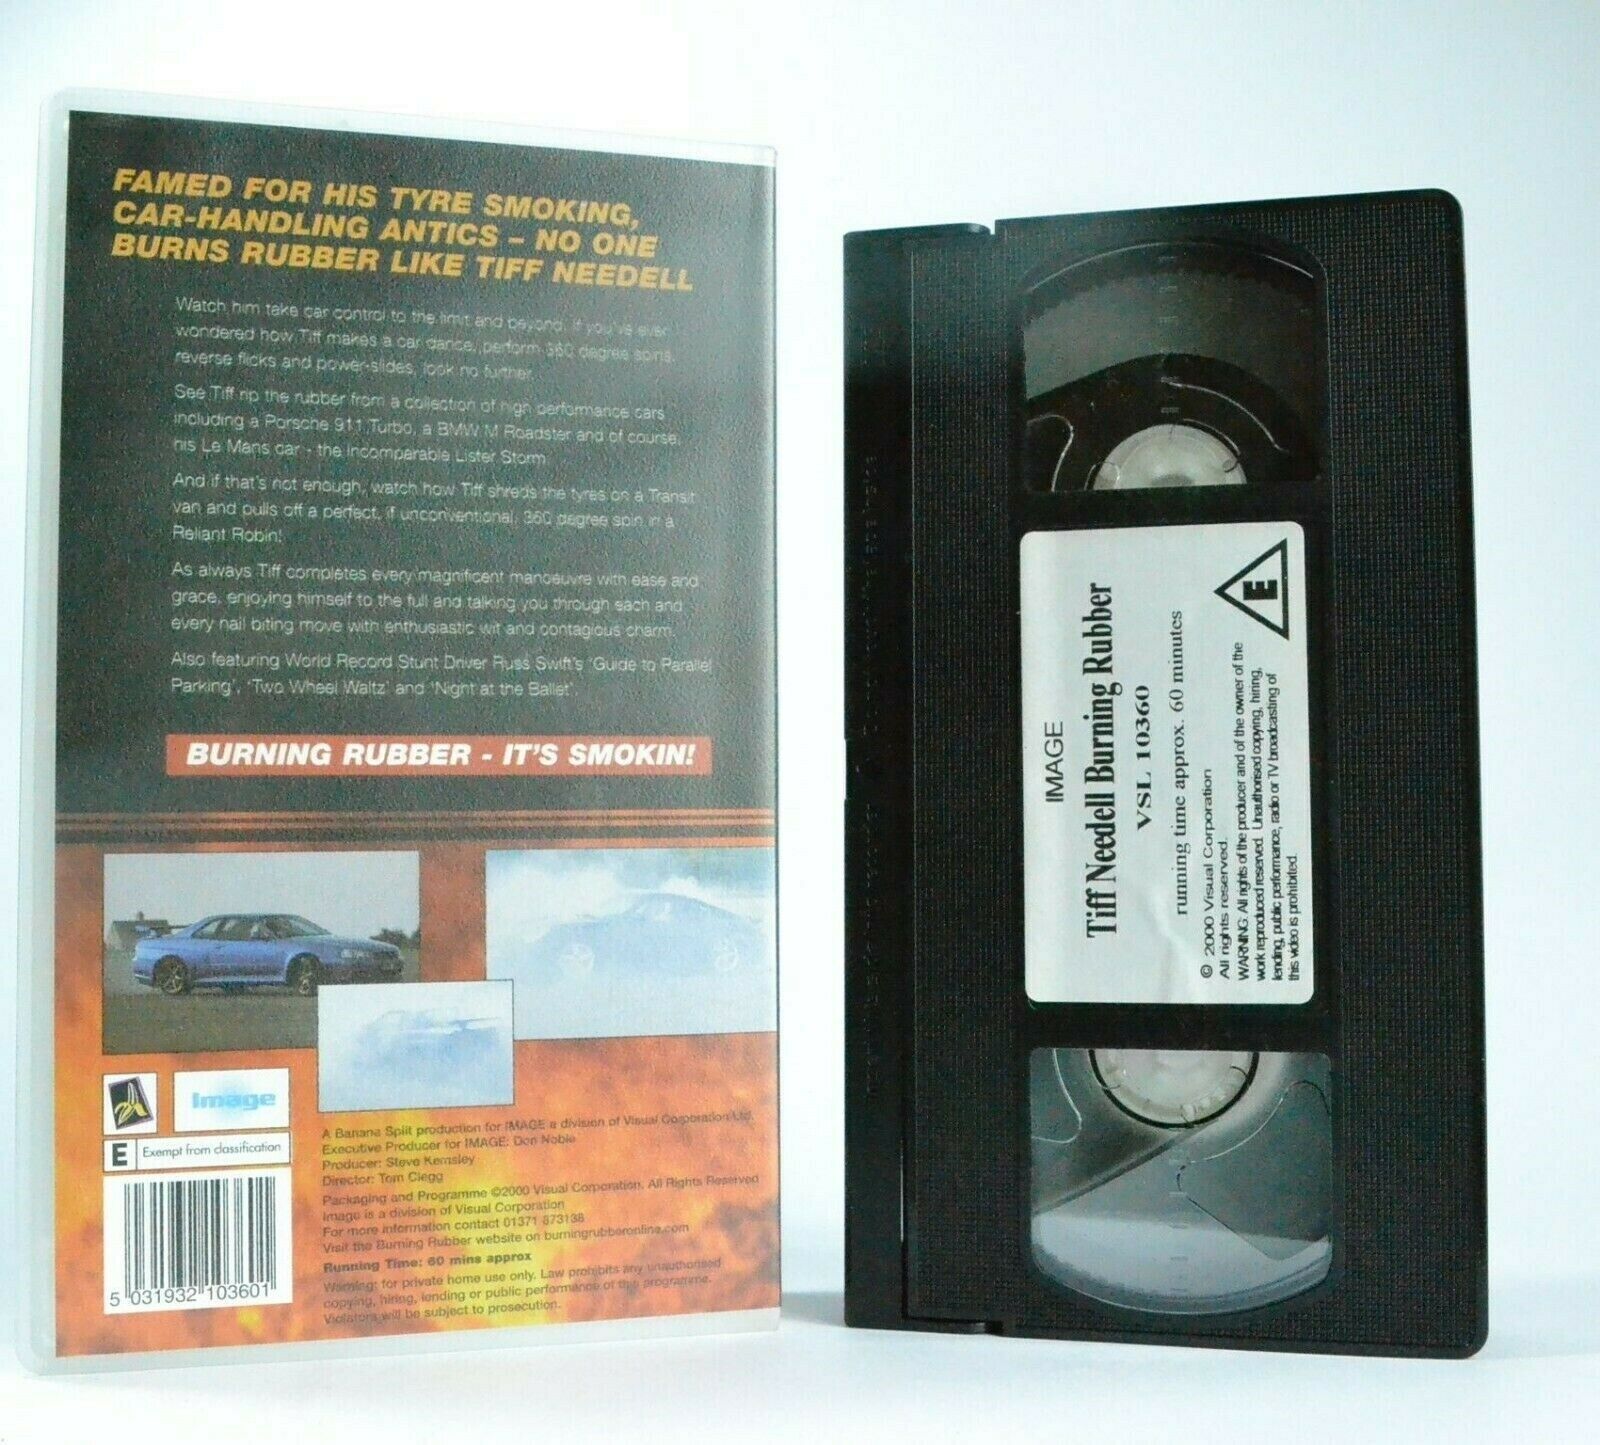 Burning Rubber: By Tiff Needell - Tyre Smoking Cars - Porsche 911 Turbo - VHS-